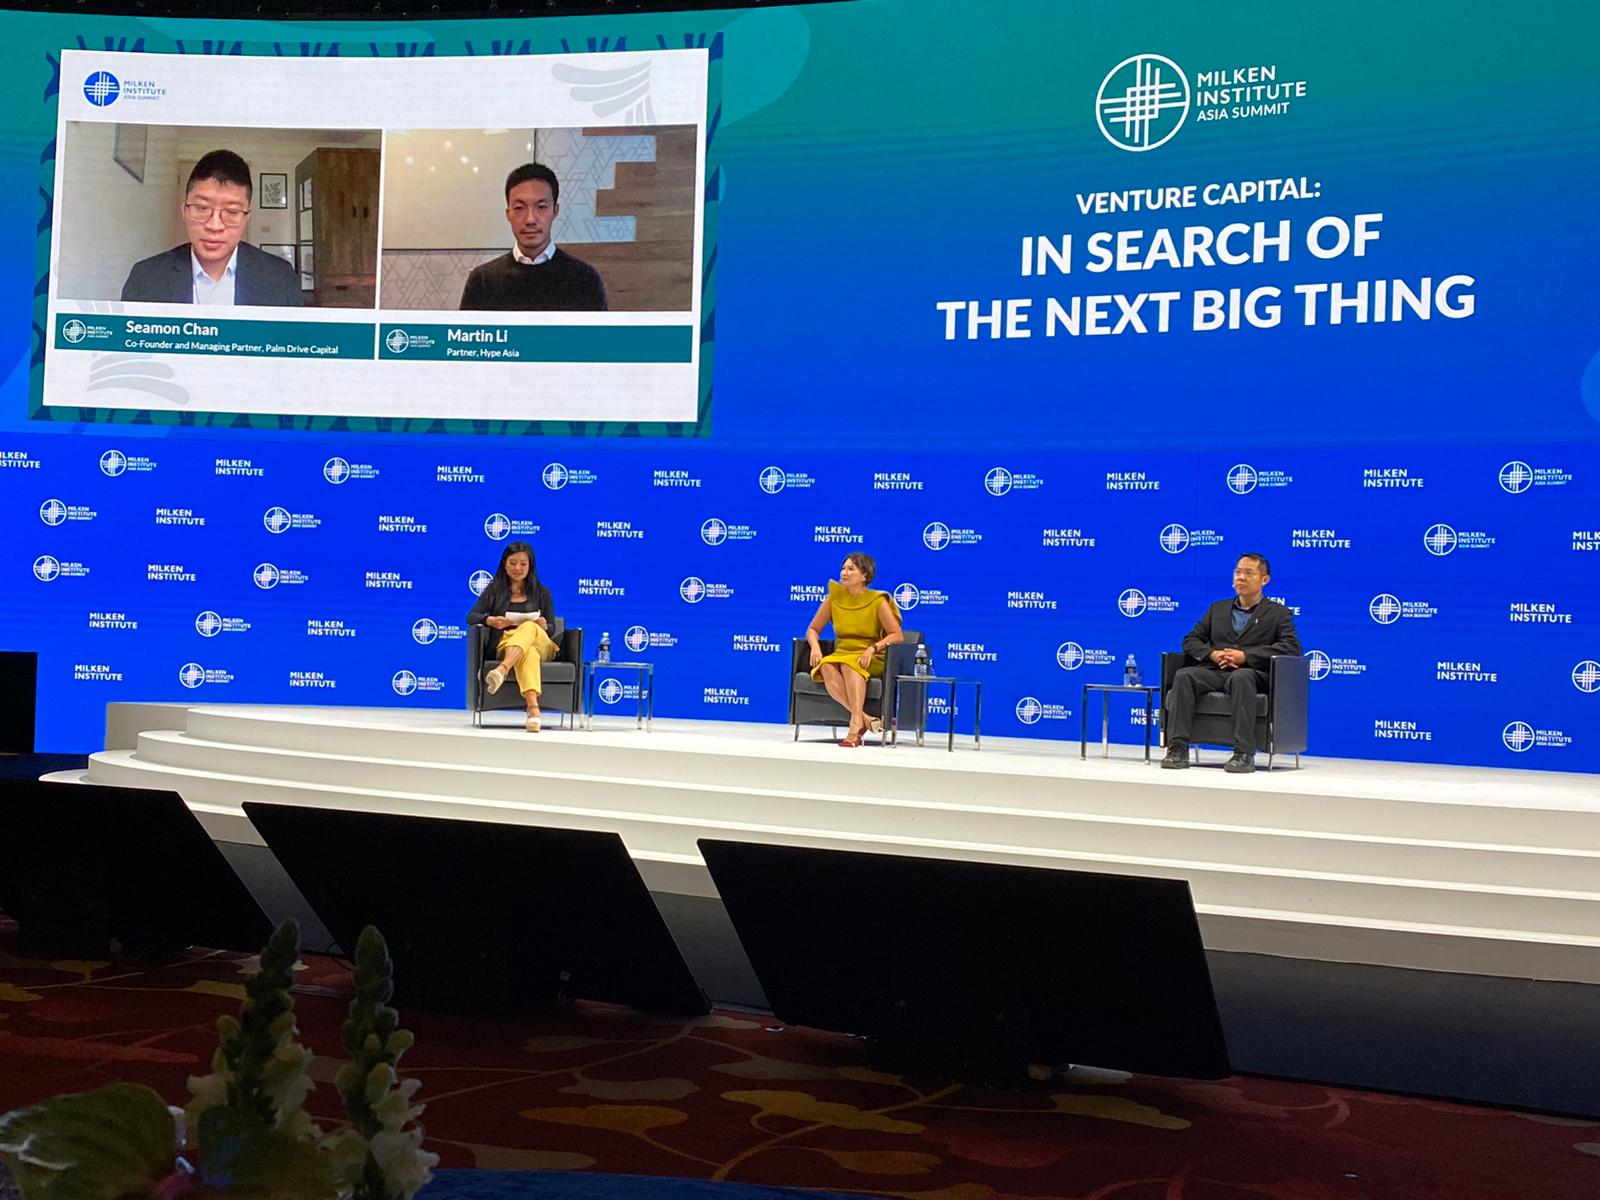 Milken Institute Global Asia Summit 2020 What’s next for Asia’s